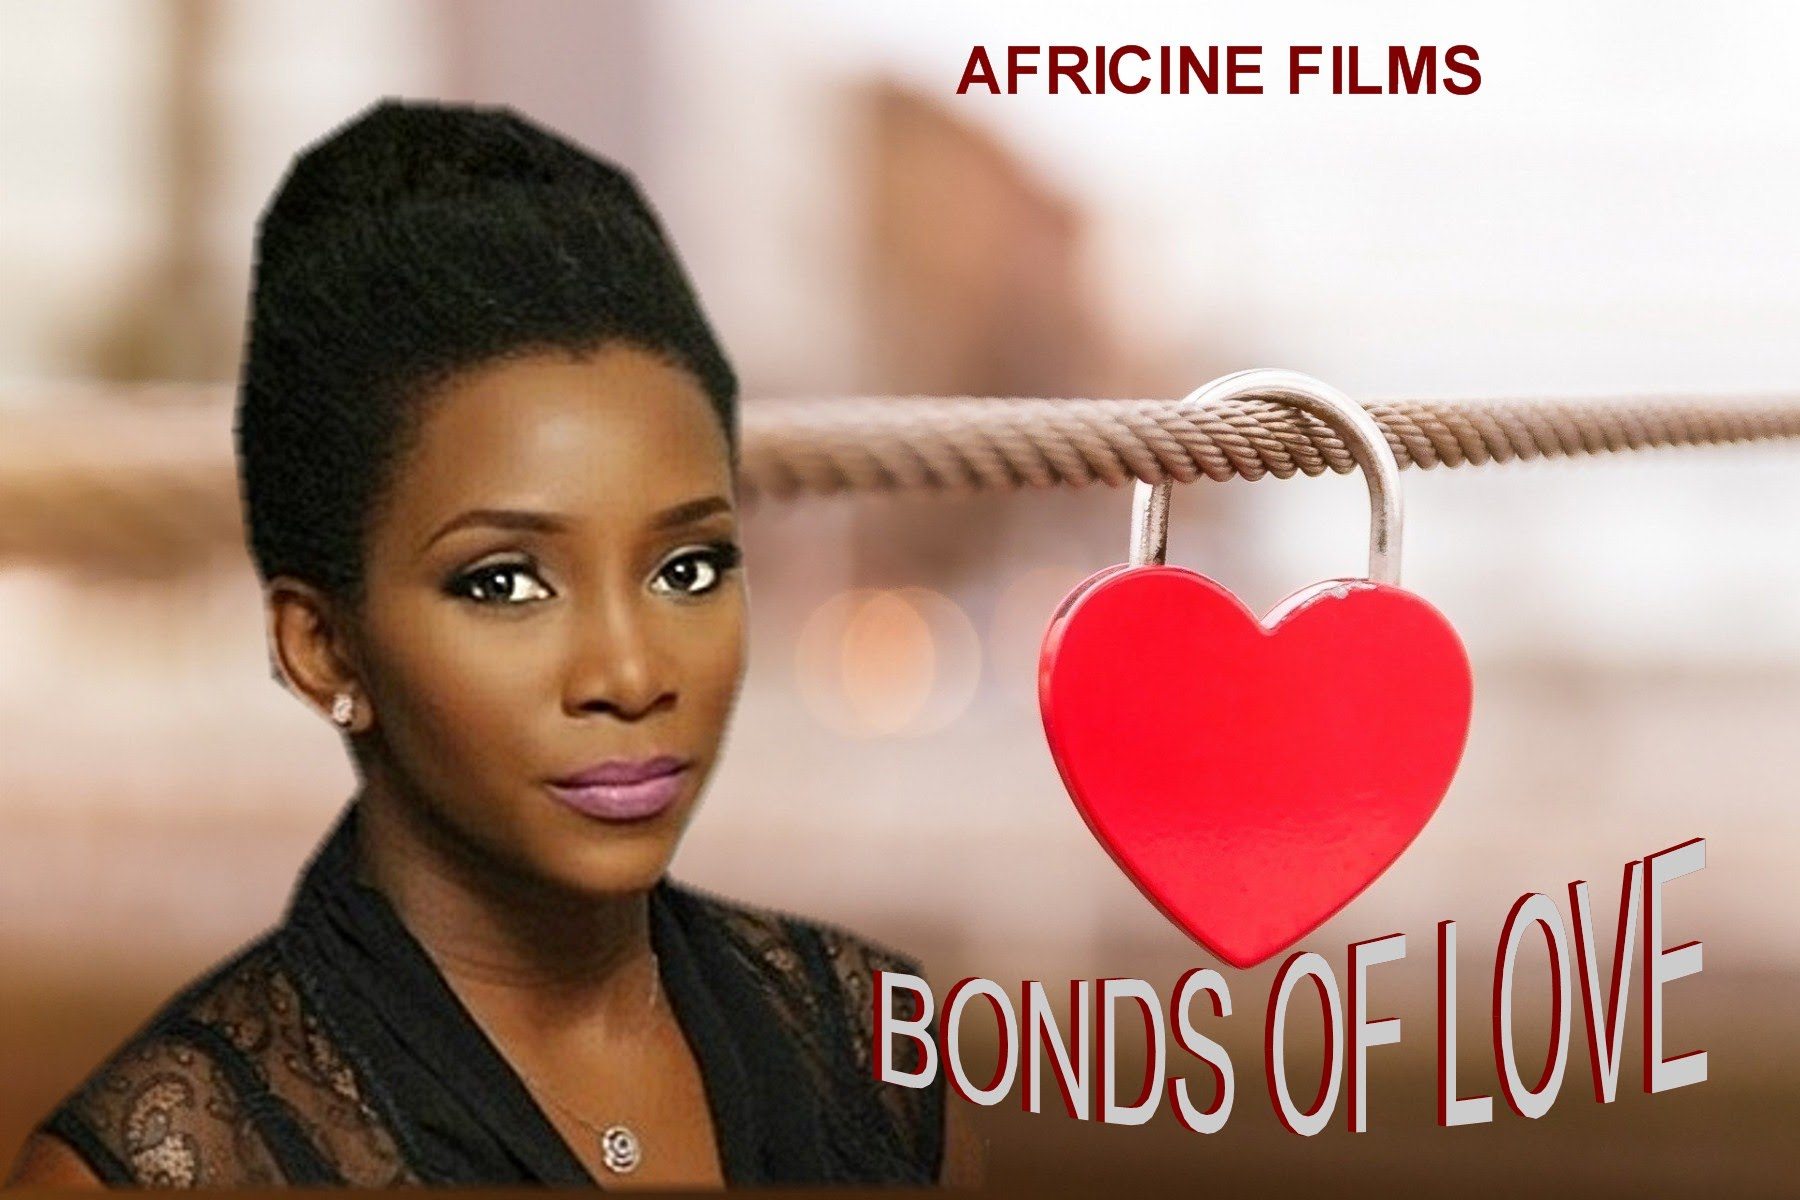 Nollywood Movies: 10 Romantic Nigerian Movies Of All Times You Should Watch